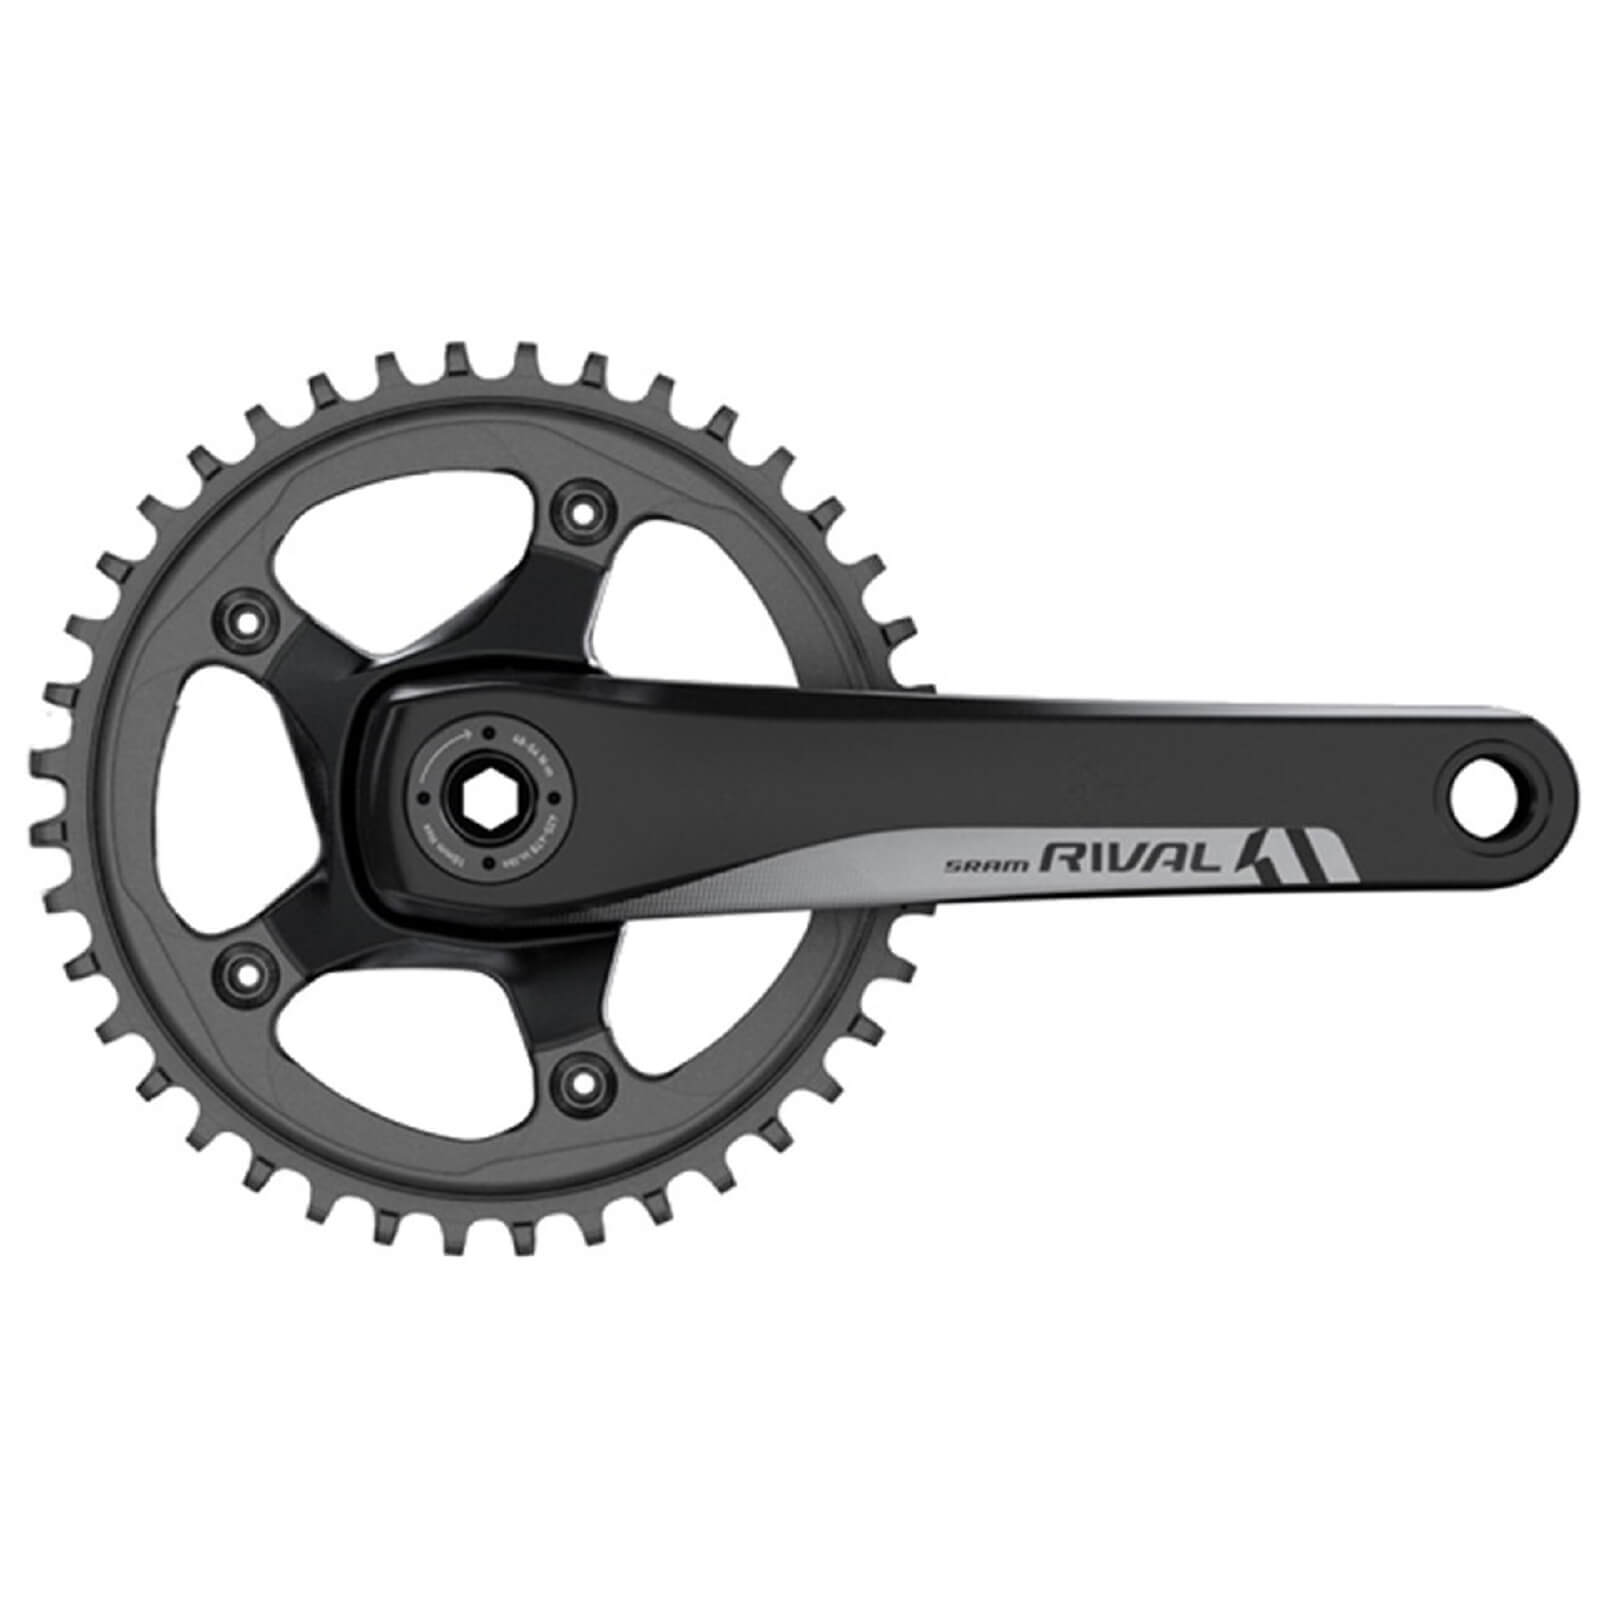 SRAM Rival1 GXP Chainset – 42T – 170mm